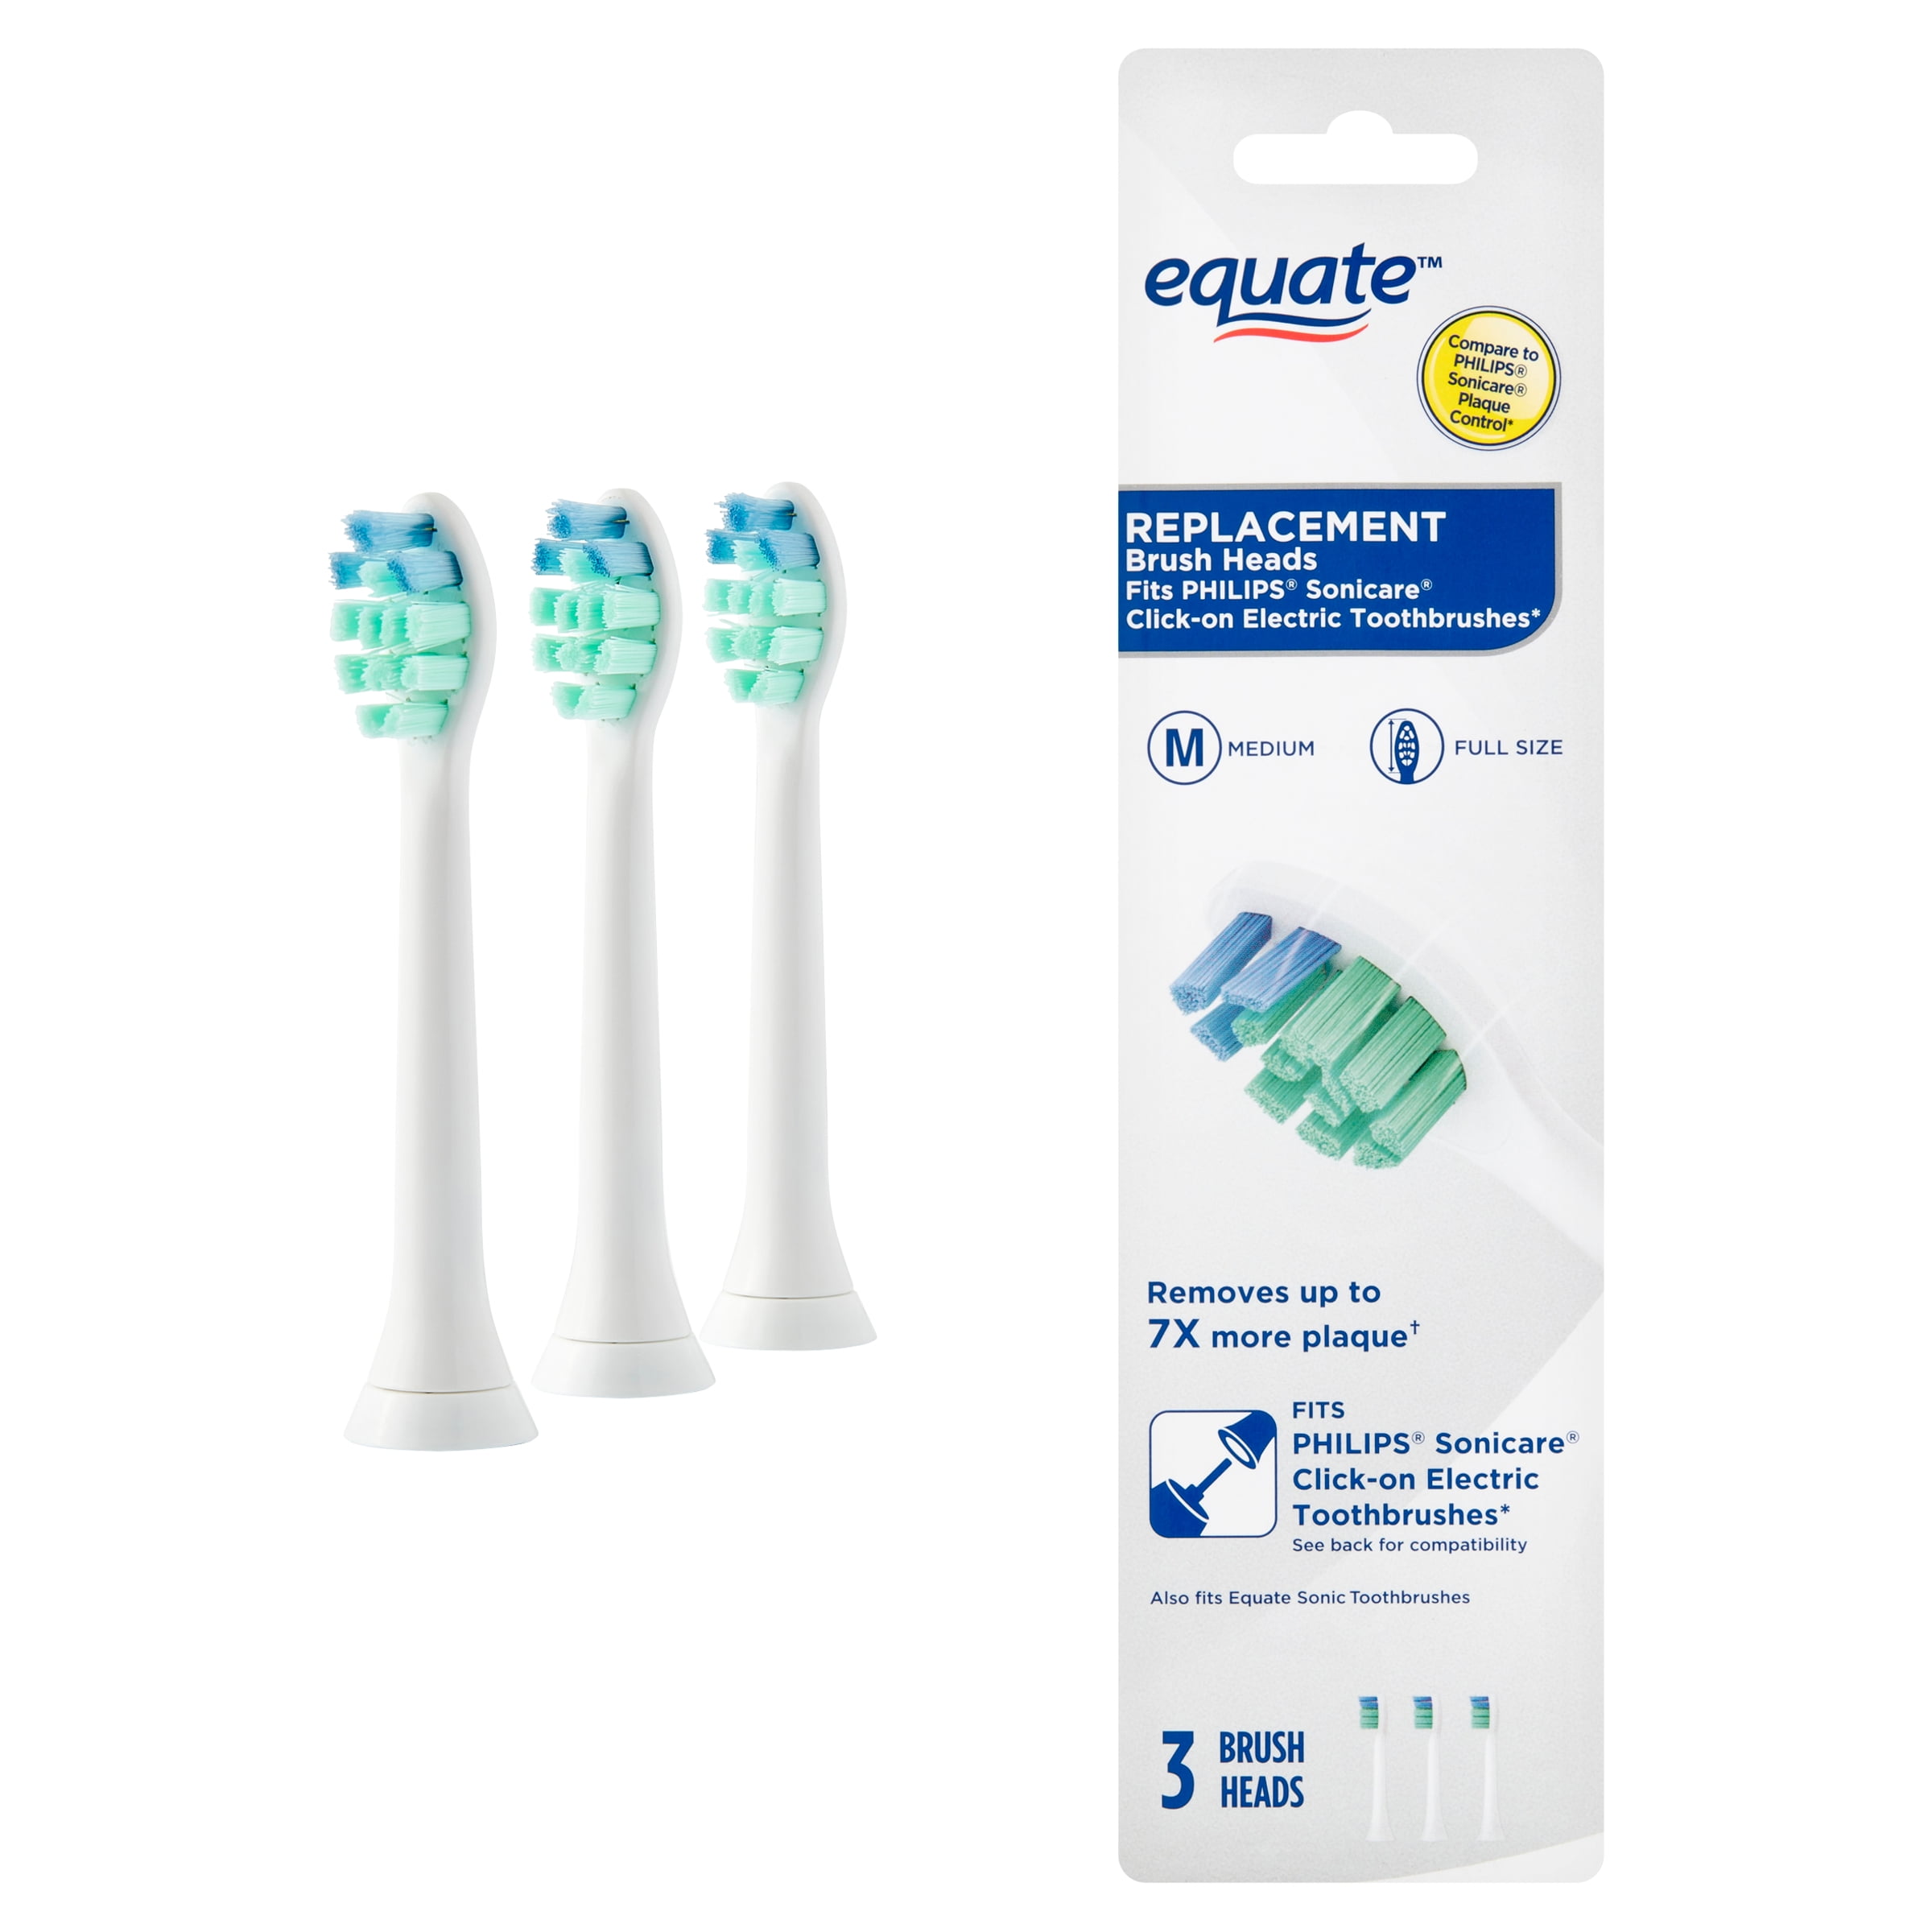 Equate SmileSonic Pro Advanced Clean Sonic Replacement Toothbrush Brush Heads, White, 3 Count